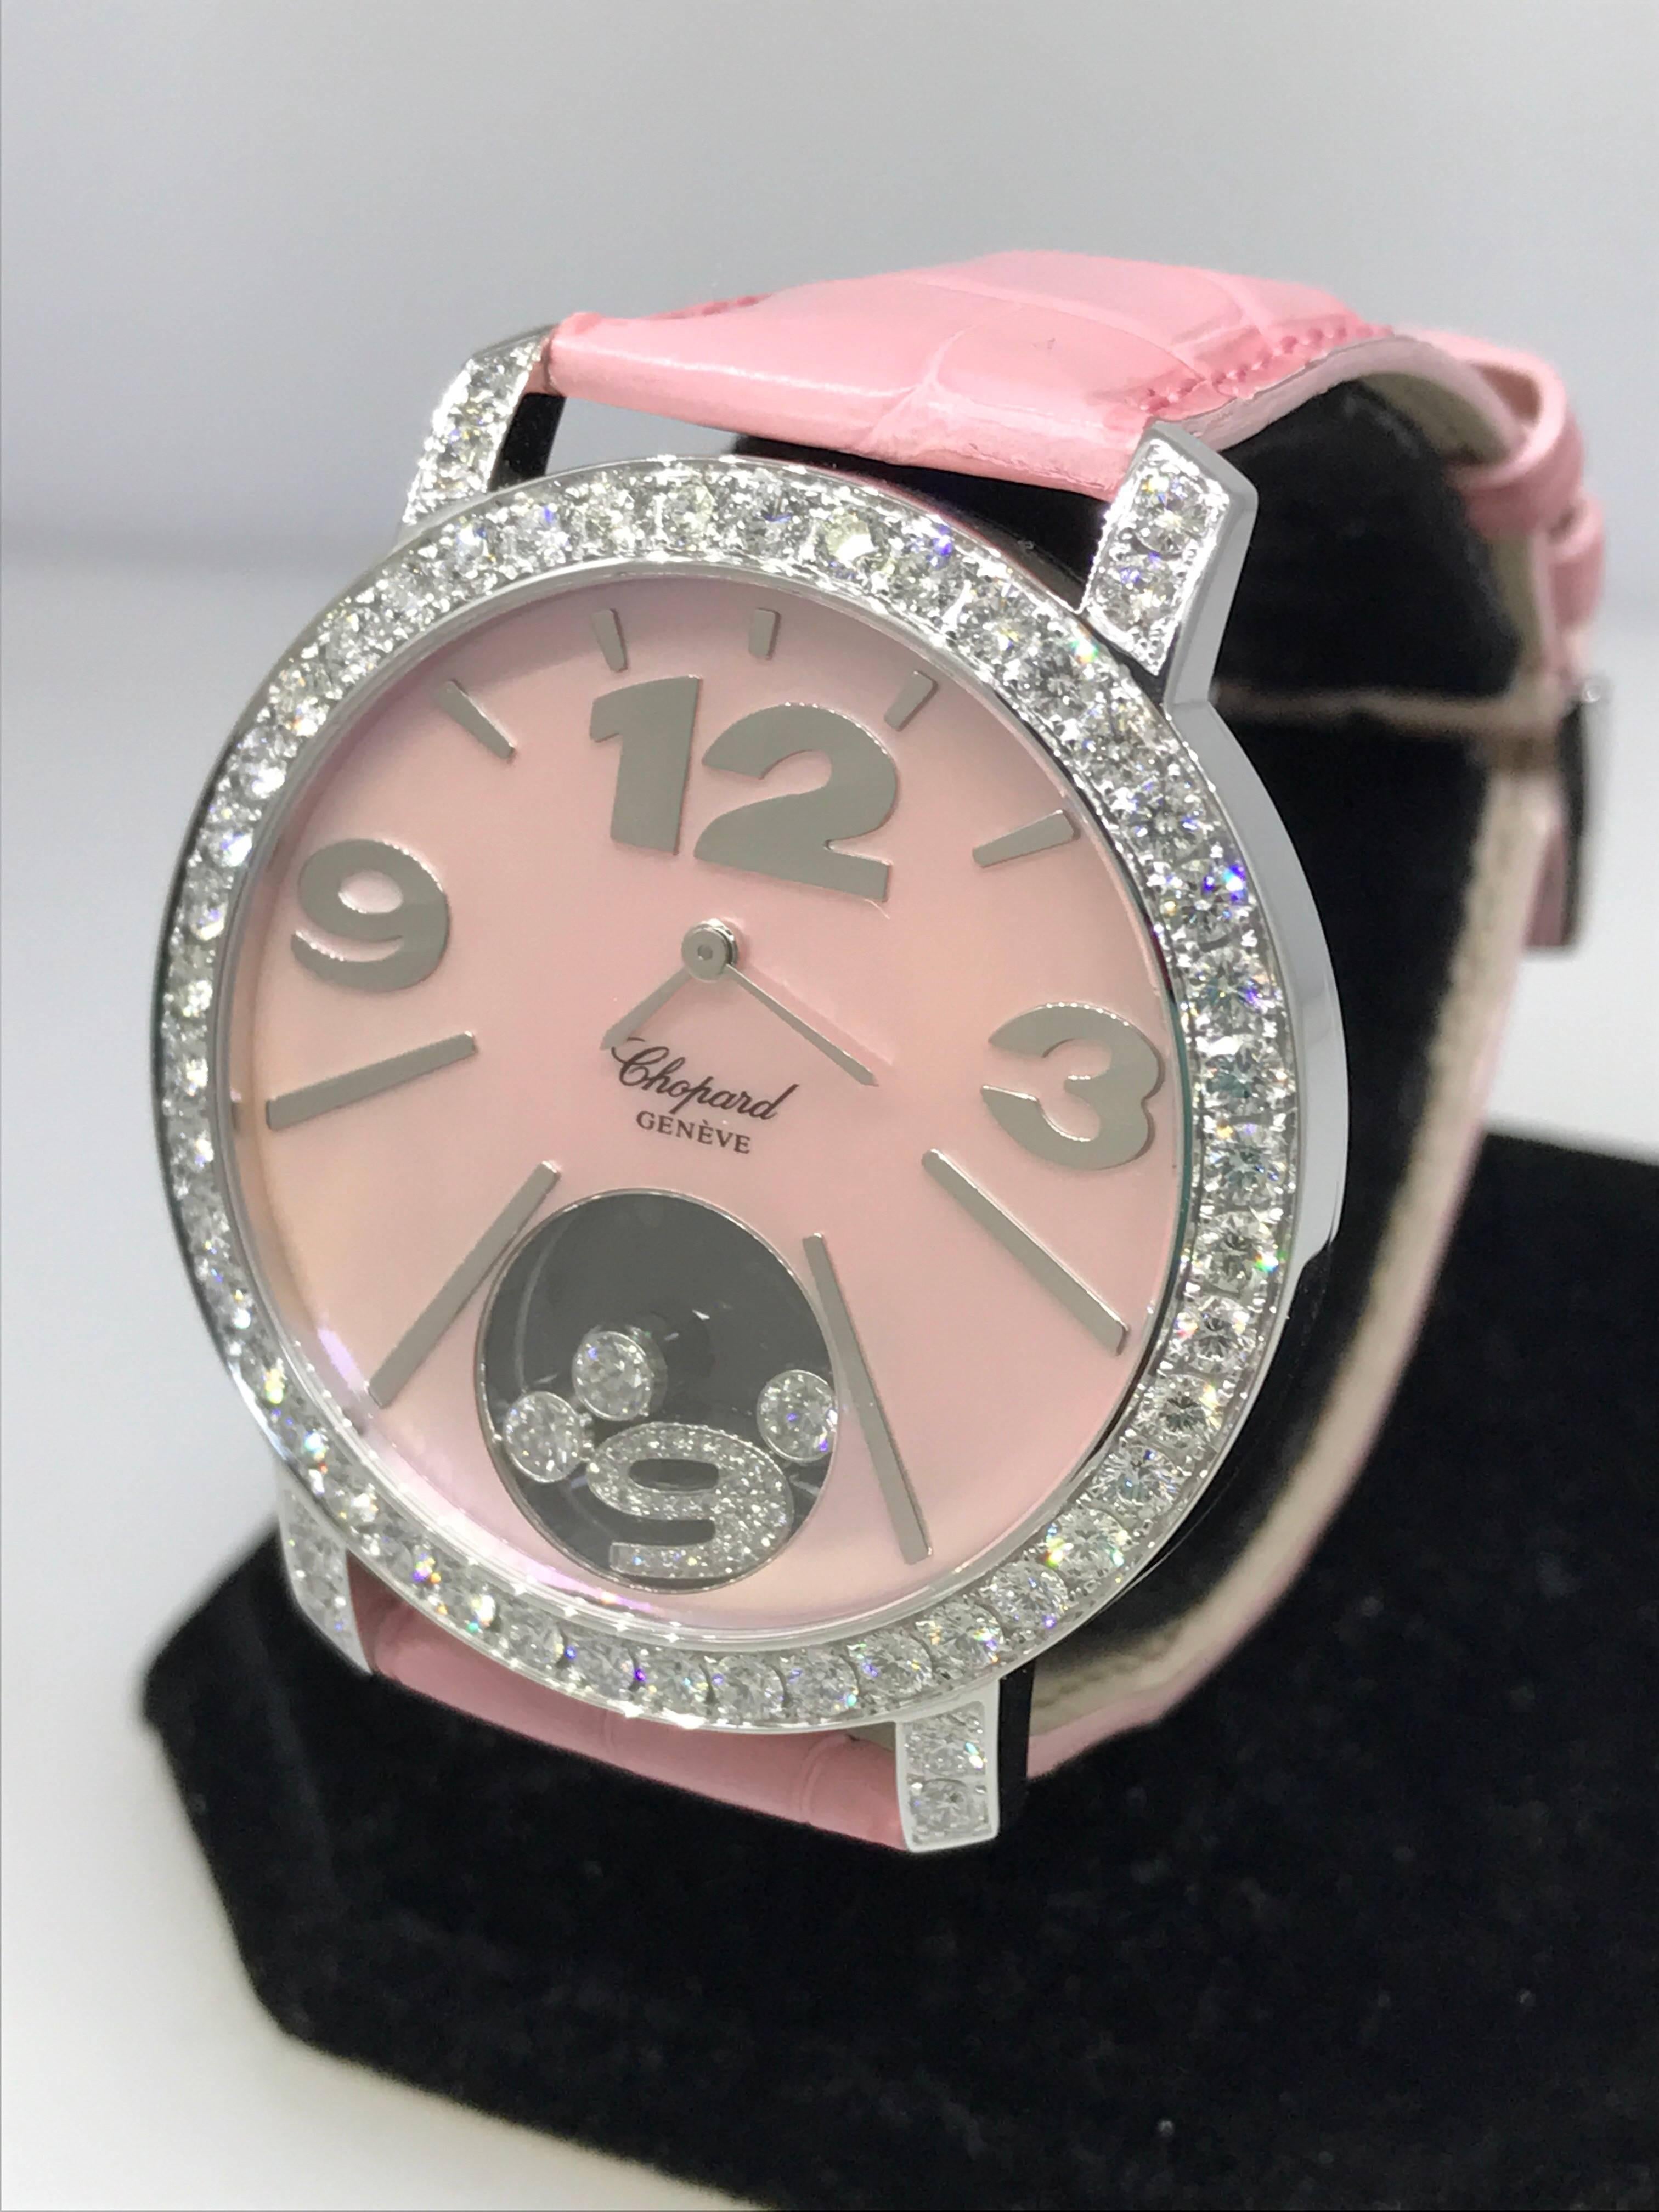 Chopard Happy Diamonds Lady's Watch 

Model Number: 20/7450-1005

100% Authentic

Brand New

Comes with original Chopard box, certificate of authenticity and warranty, and instruction manual

18 Karat White Gold Case and buckle (55.30gr)

Sapphire